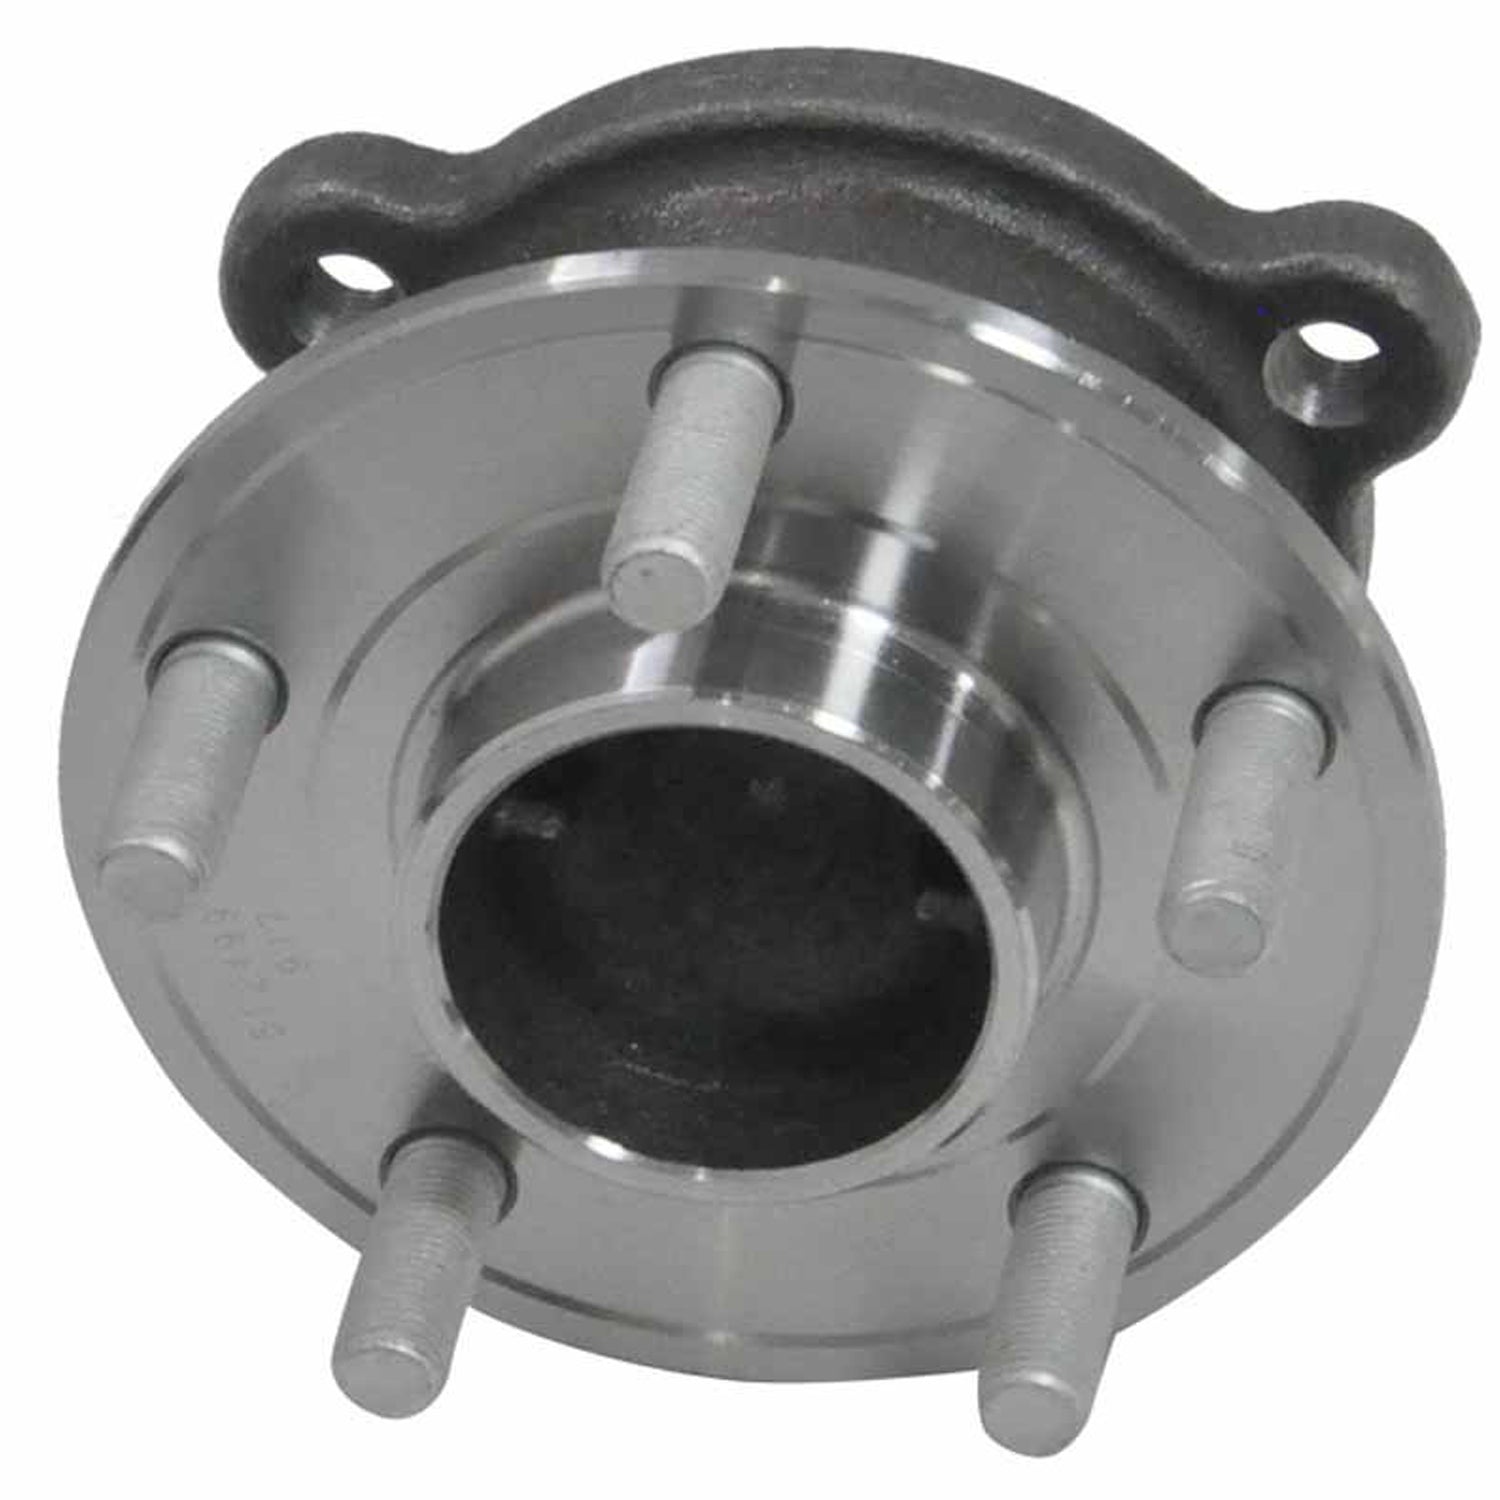 JADODE FWD Rear Wheel Hub & Bearing for Ford C-Max Escape 15-19 Lincoln MKC 5 Lug